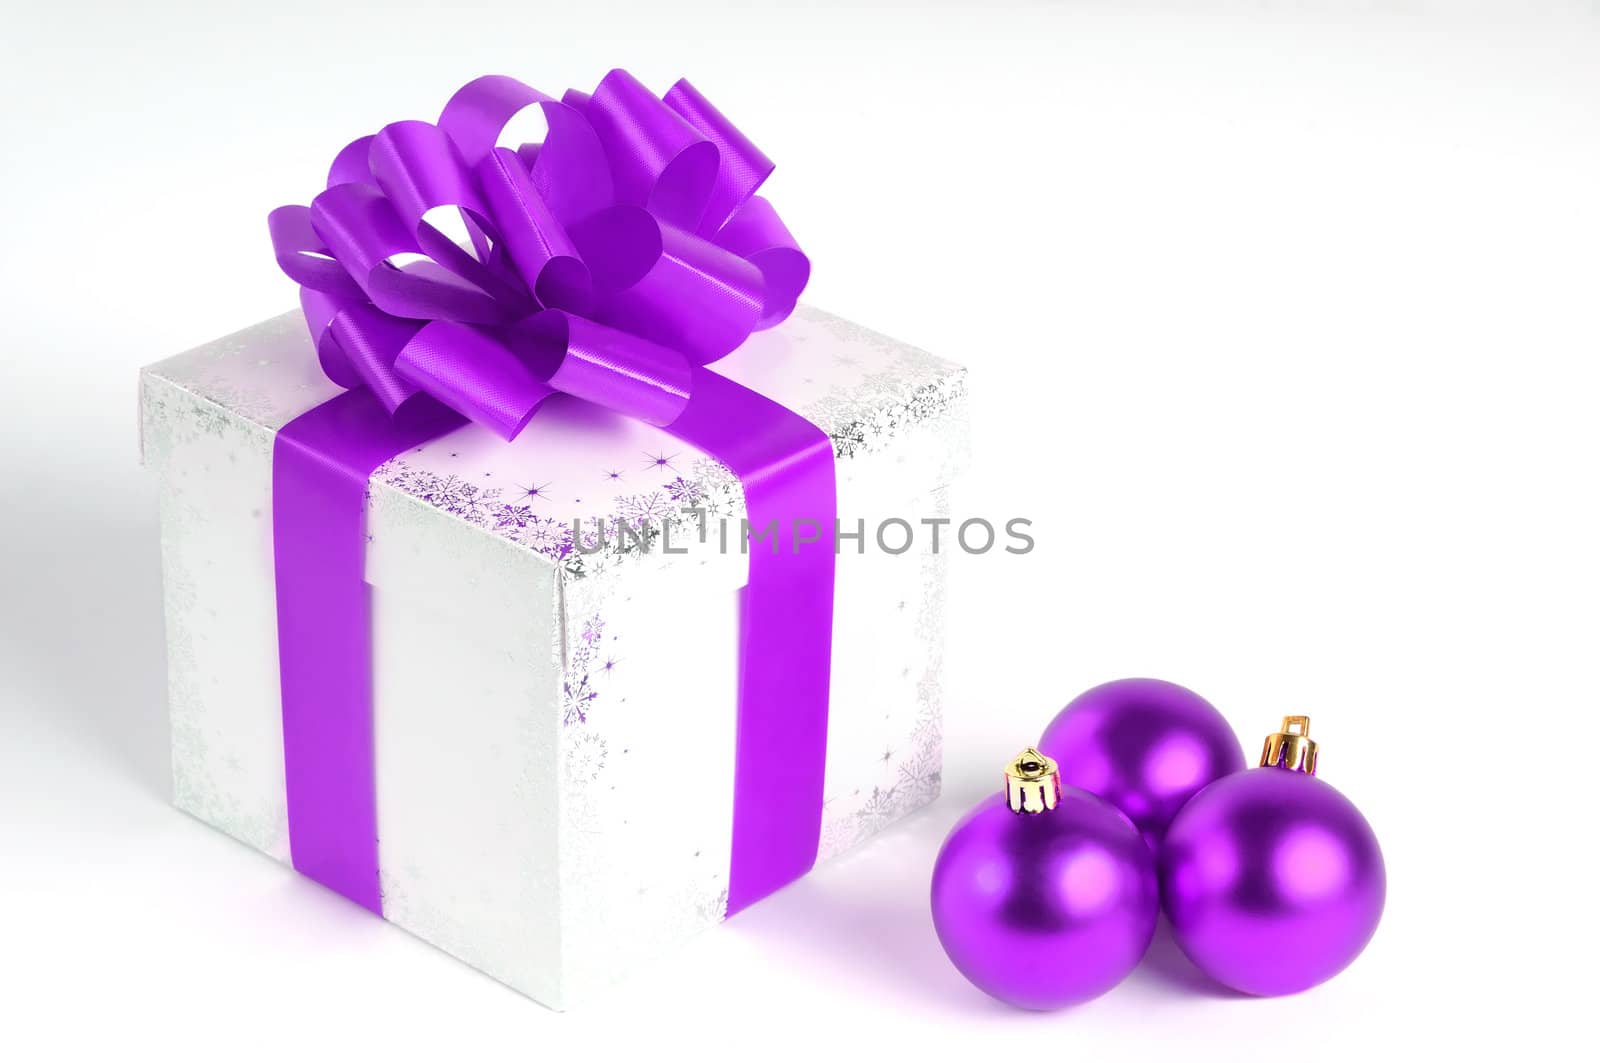 New year gift box isolated on white with Christmas balls, purple